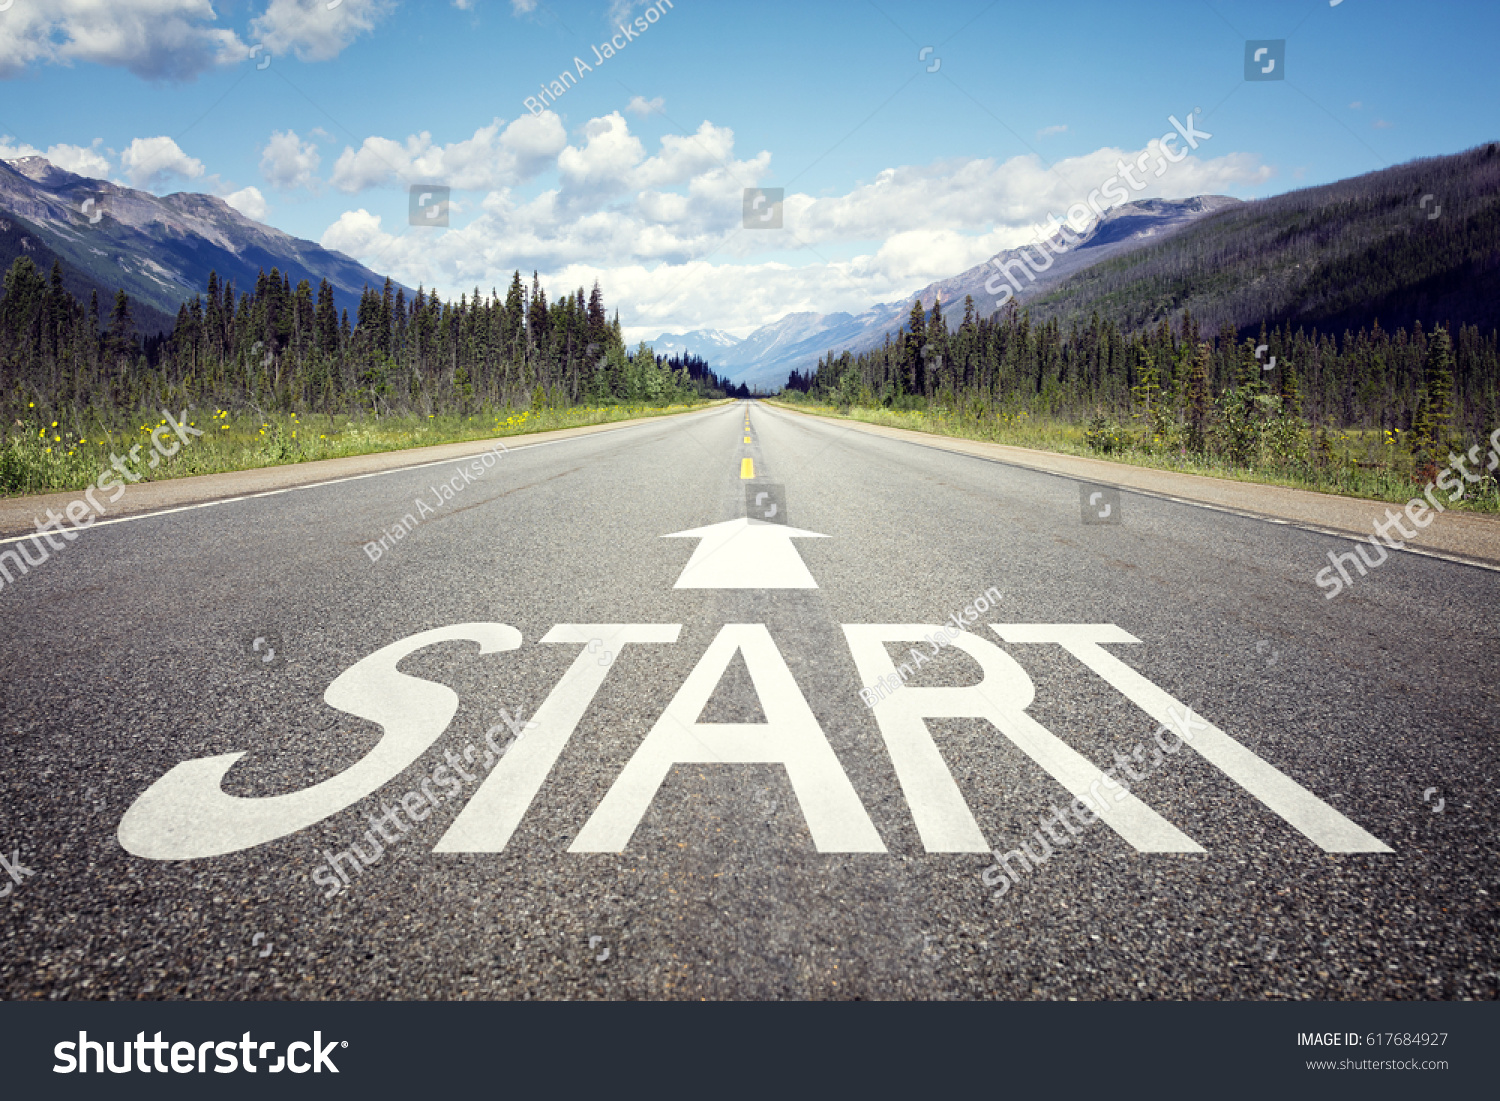 Start line on the highway concept for business planning, strategy and challenge or career path, opportunity and change #617684927